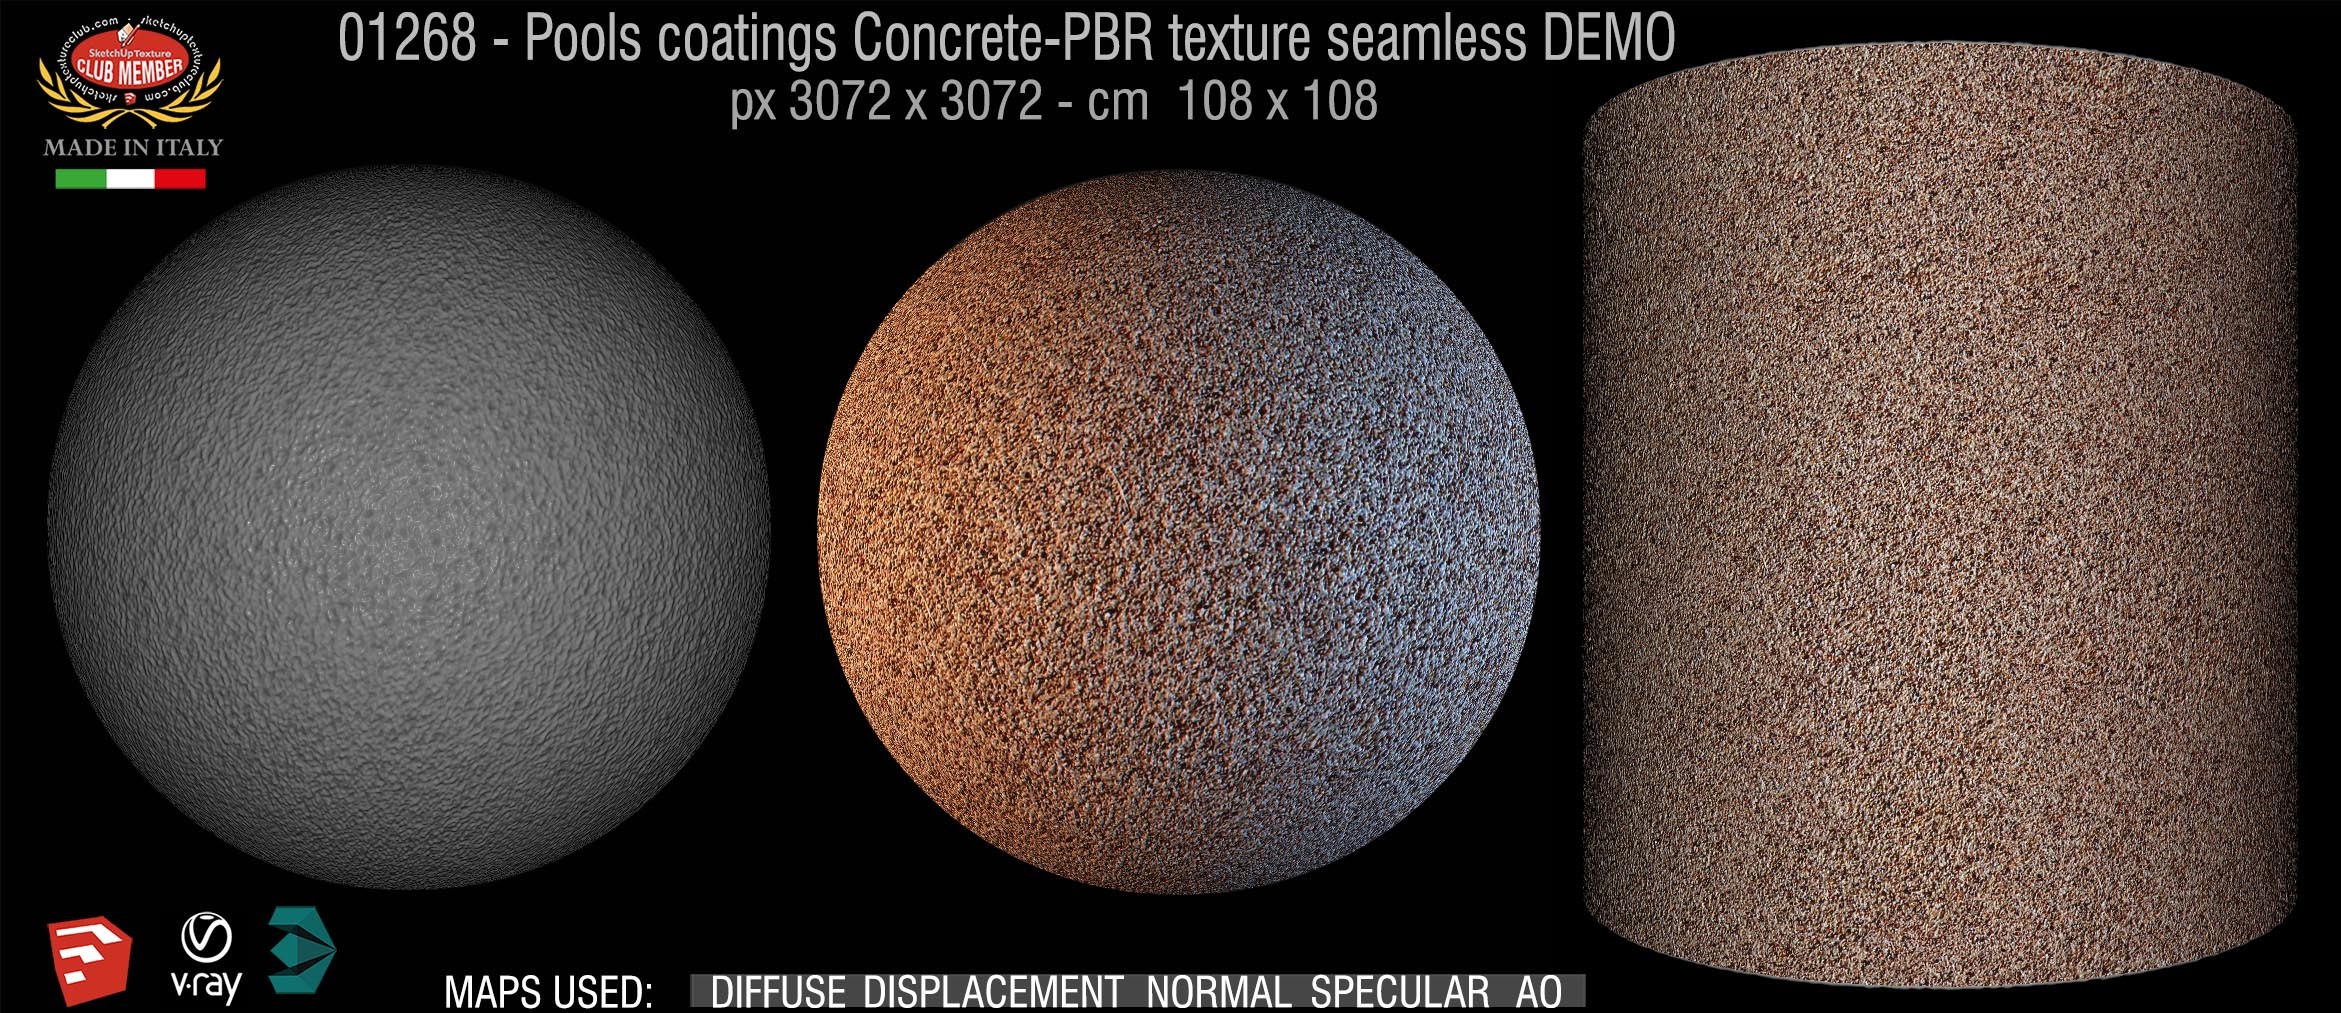 01268 Pools coatings Concrete-PBR texture seamless DEMO